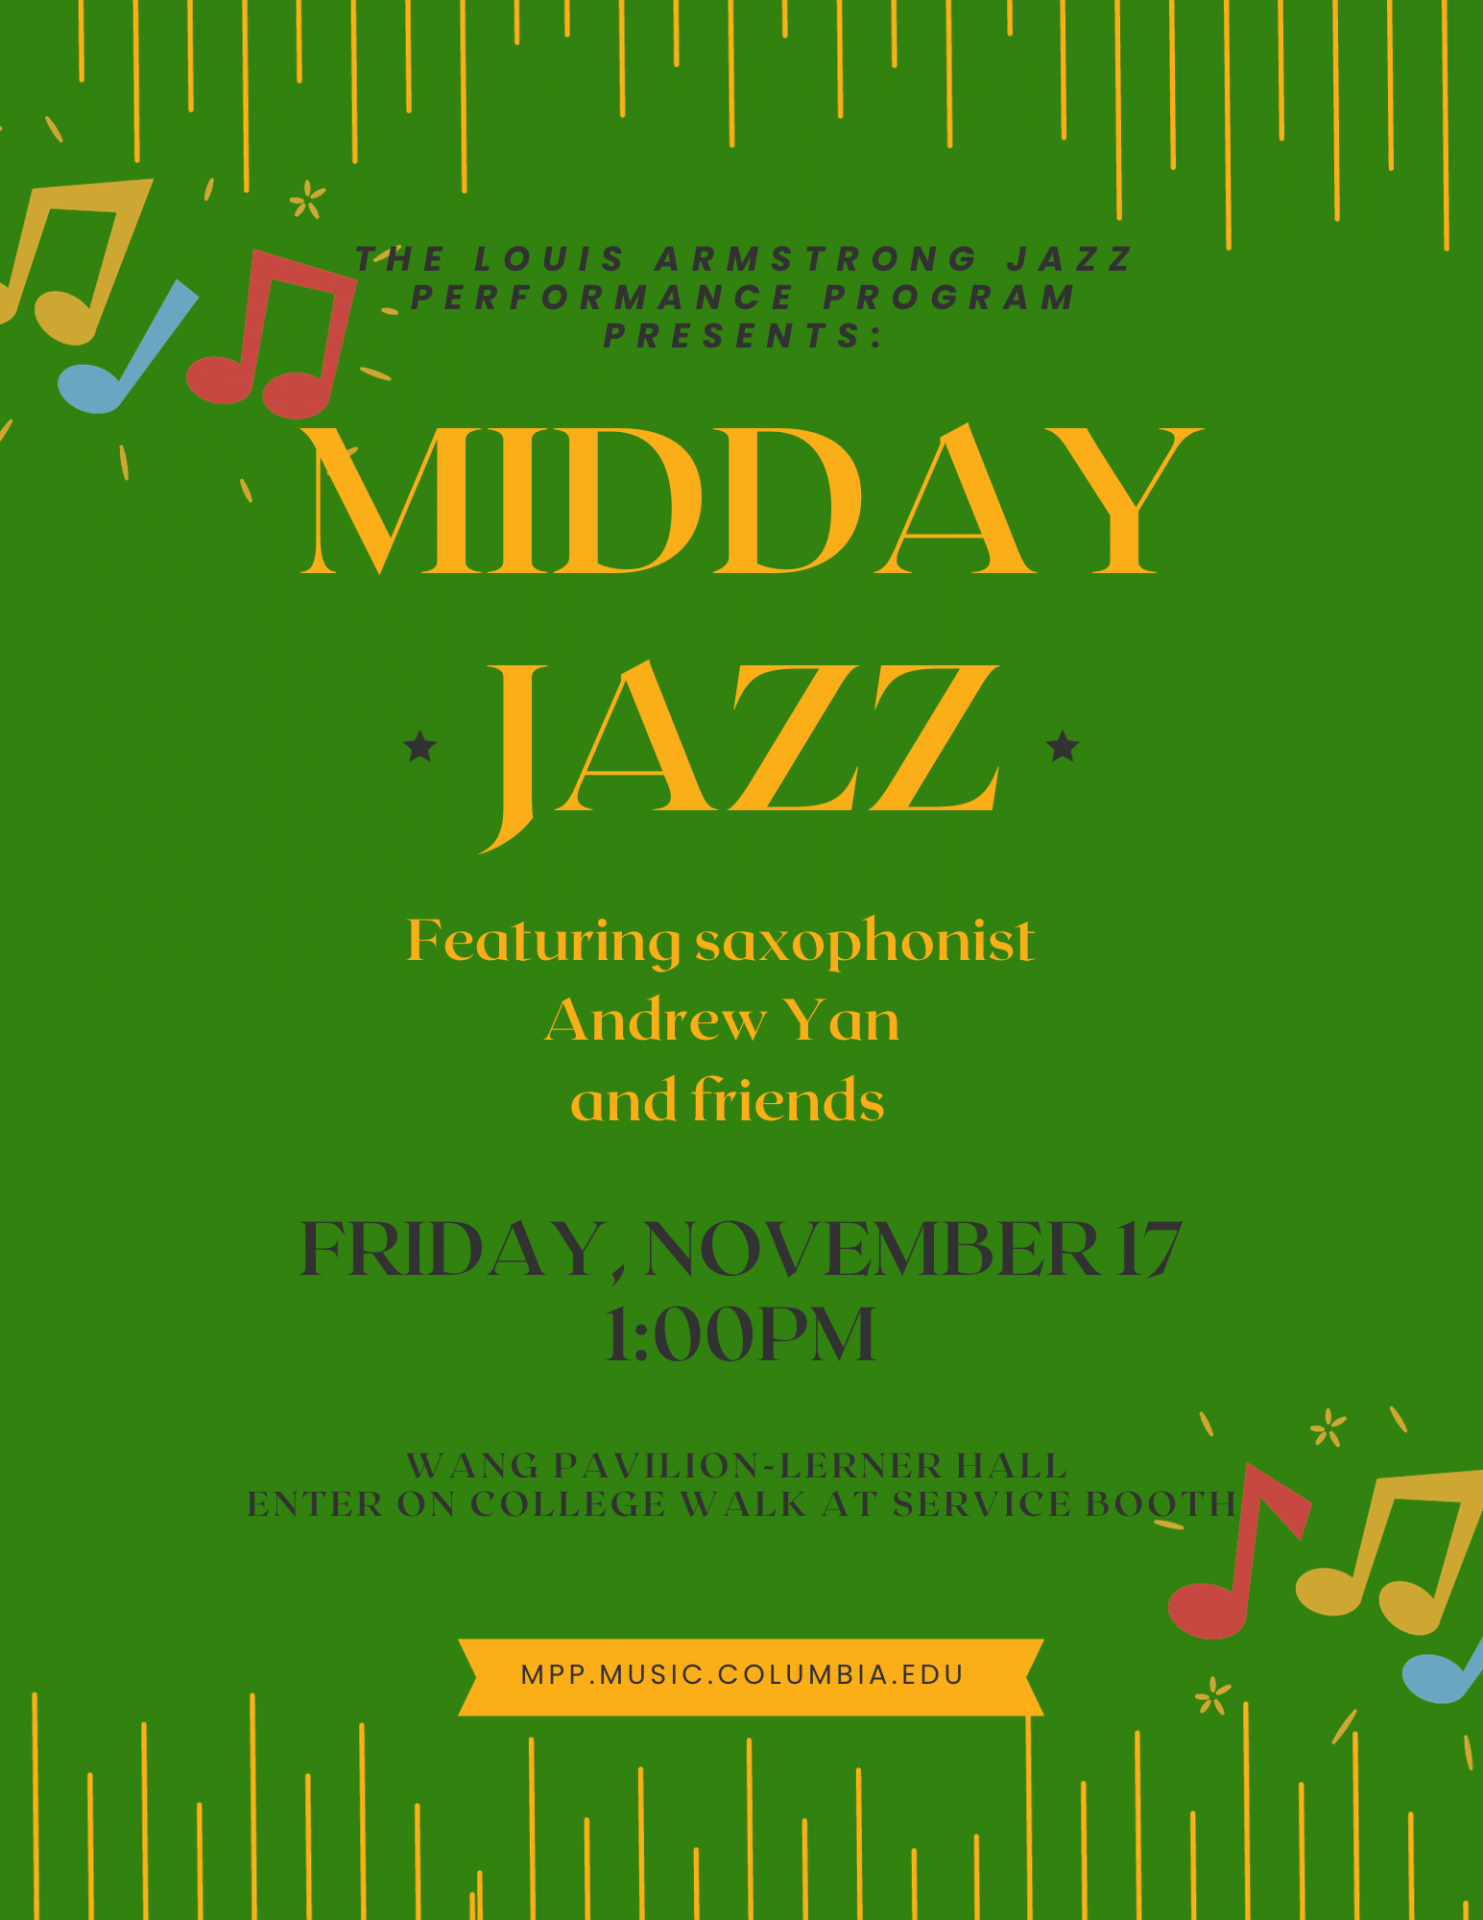 Flyer for Mid Day Jazz on Friday 11/17 @ 1pm with Andrew Yan and friends in the Wang Pavilion that says, "Join us for a Mid Day Jazz concert featuring musicians from the Louis Armstrong Jazz Performance Program on Friday, November 17th, 2023 at 1pm. Wang Pavilion, Lerner Hall. Free and open to the public."